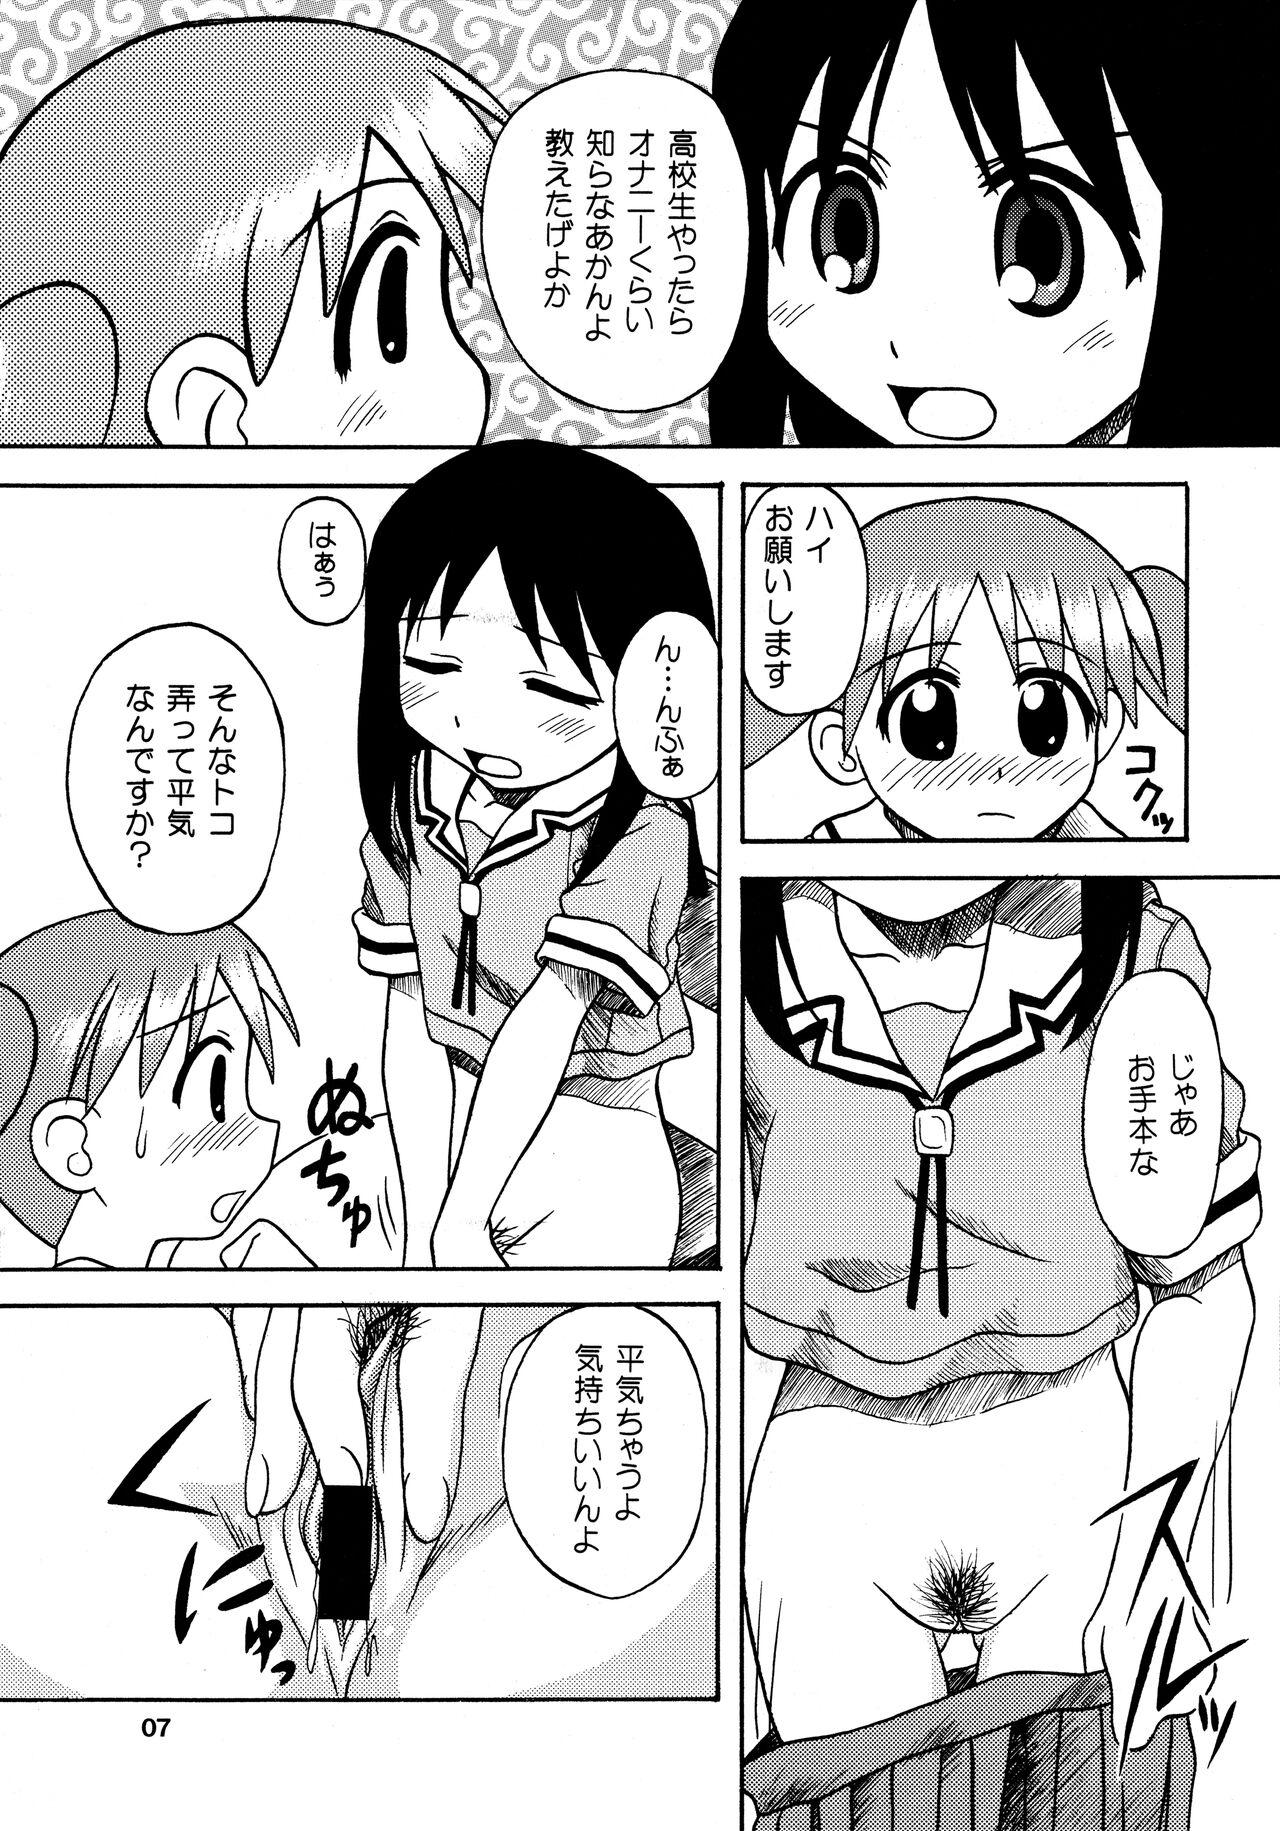 Soapy ANOTHER LIFE - Azumanga daioh Sexo - Page 7